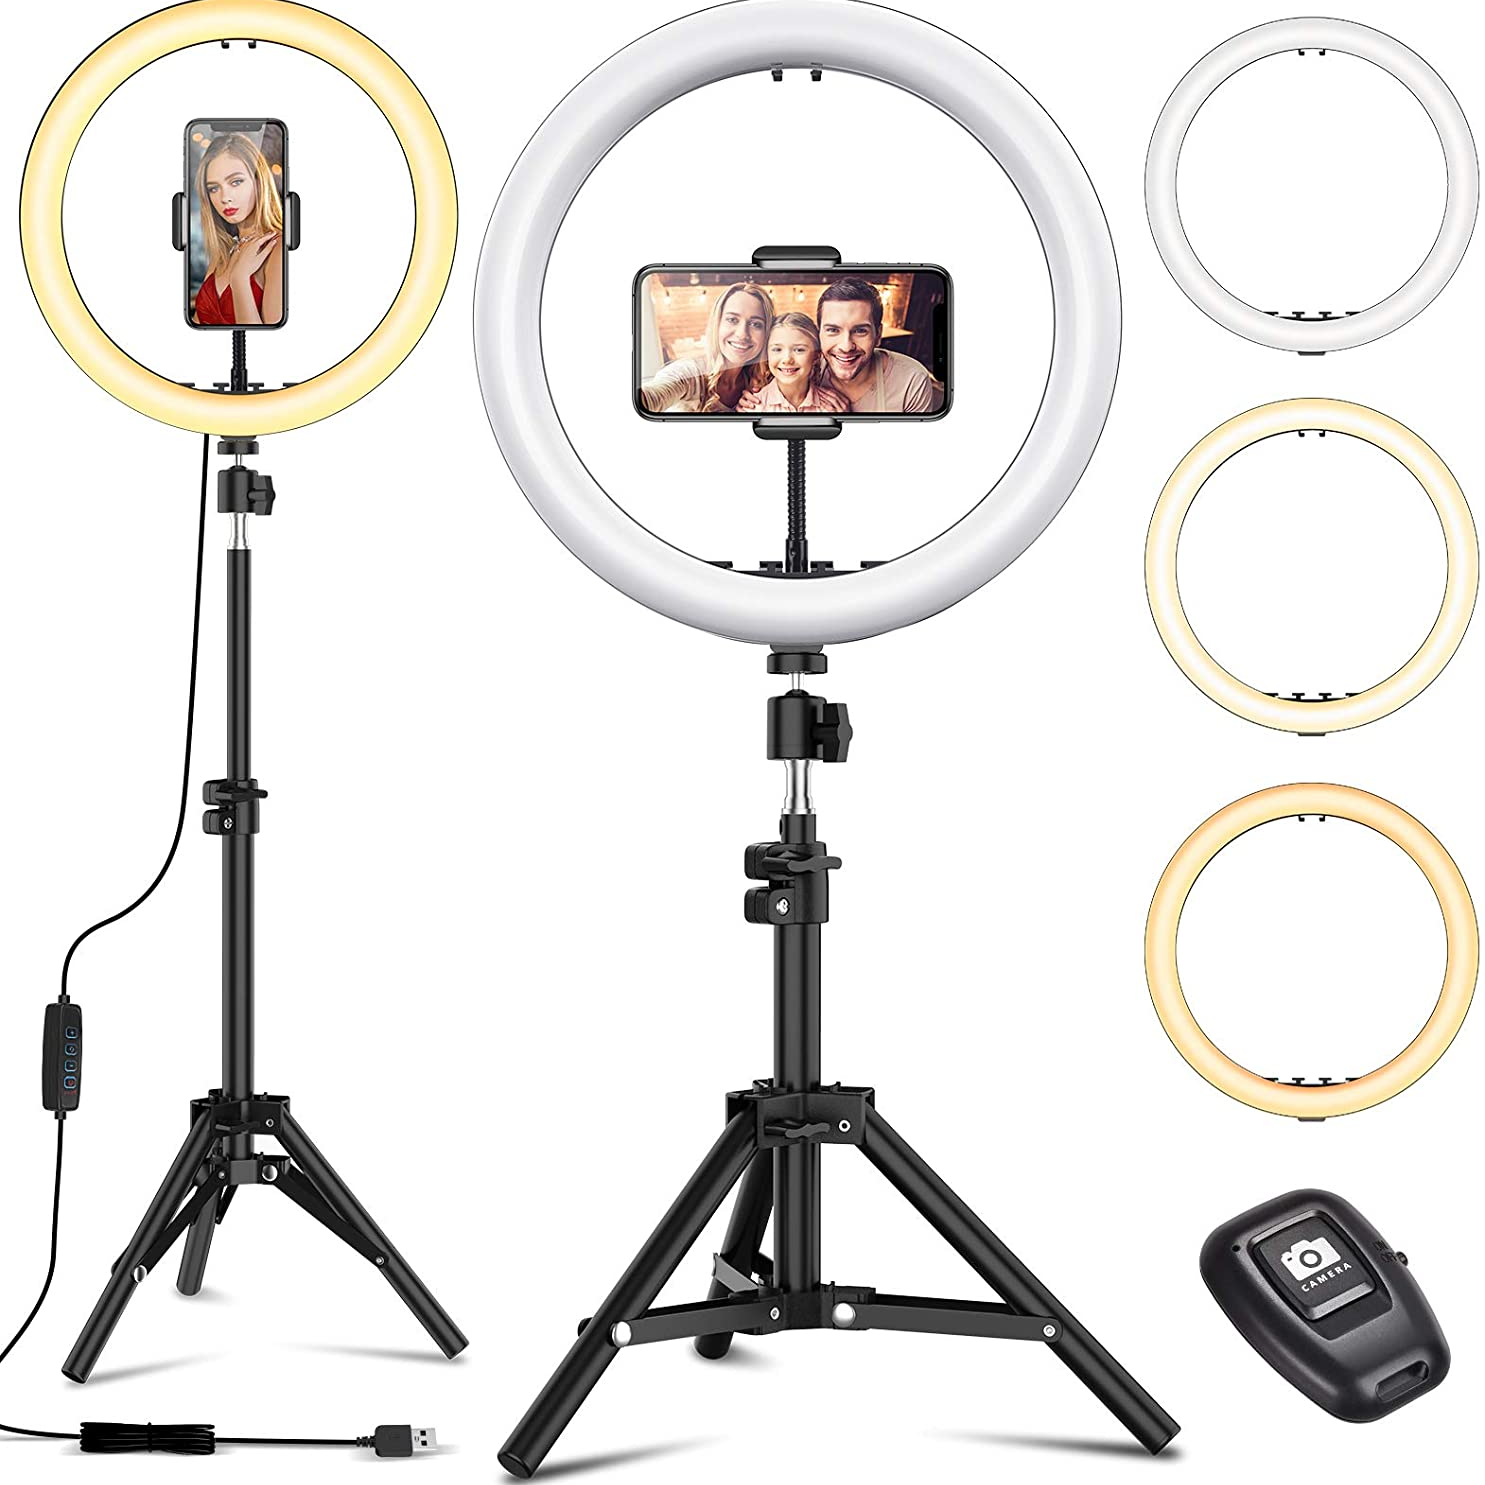 

ELEGIANT EGL-02P 12 inch 3 Color Modes Dimmable LED Ring Full Light Tripod Stand Live Selfie Holder with Remote Control